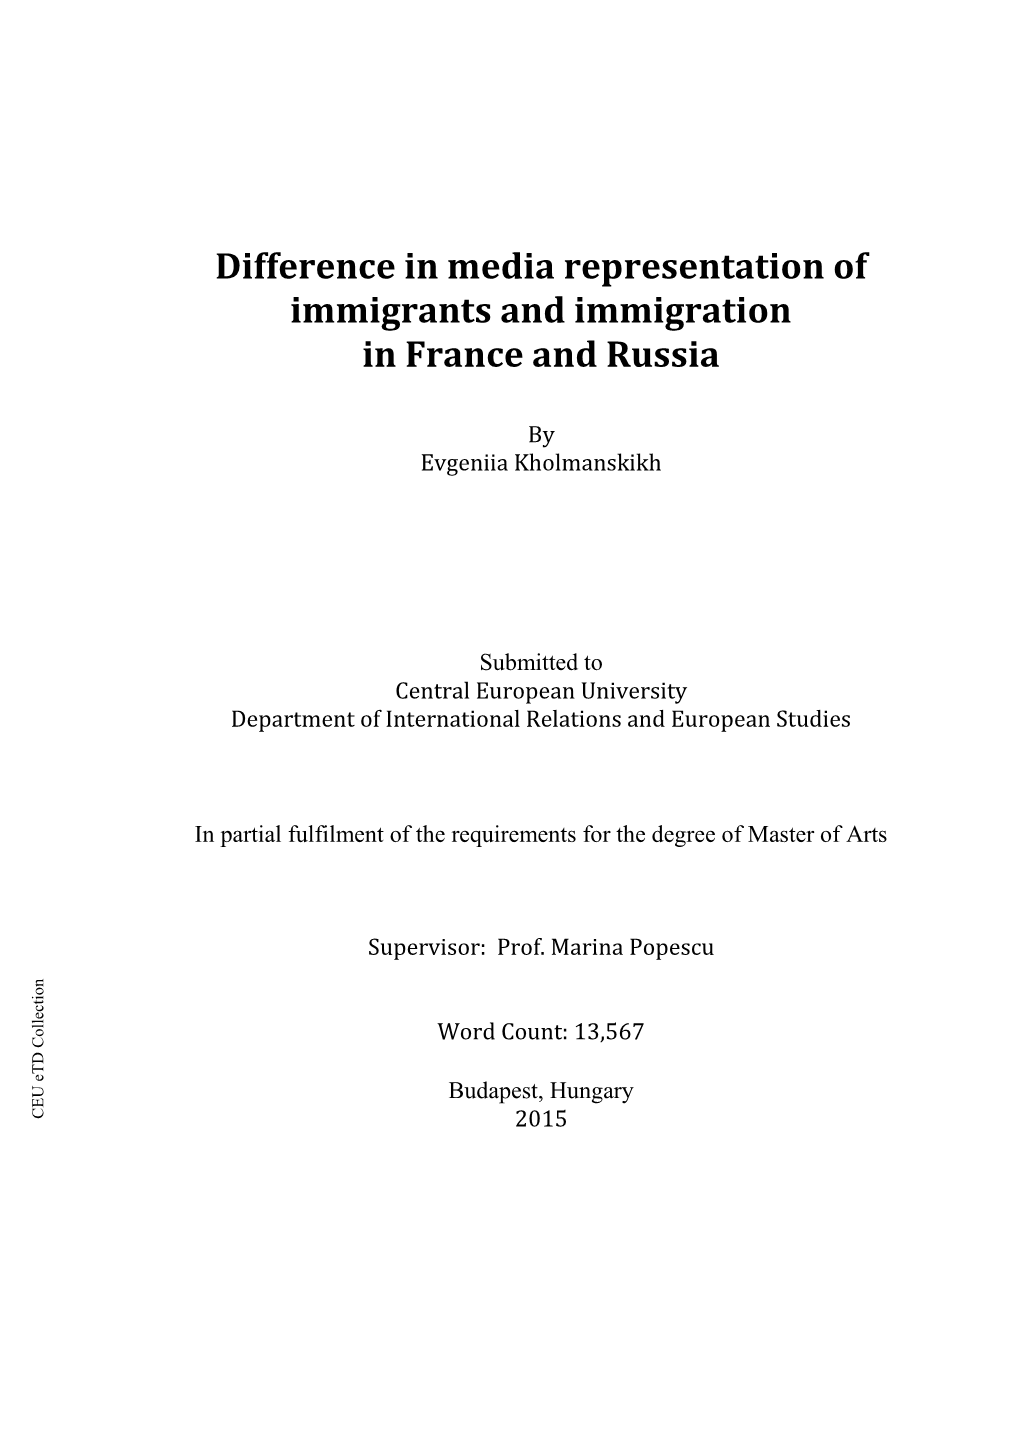 Difference in Media Representation of Immigrants and Immigration in France and Russia